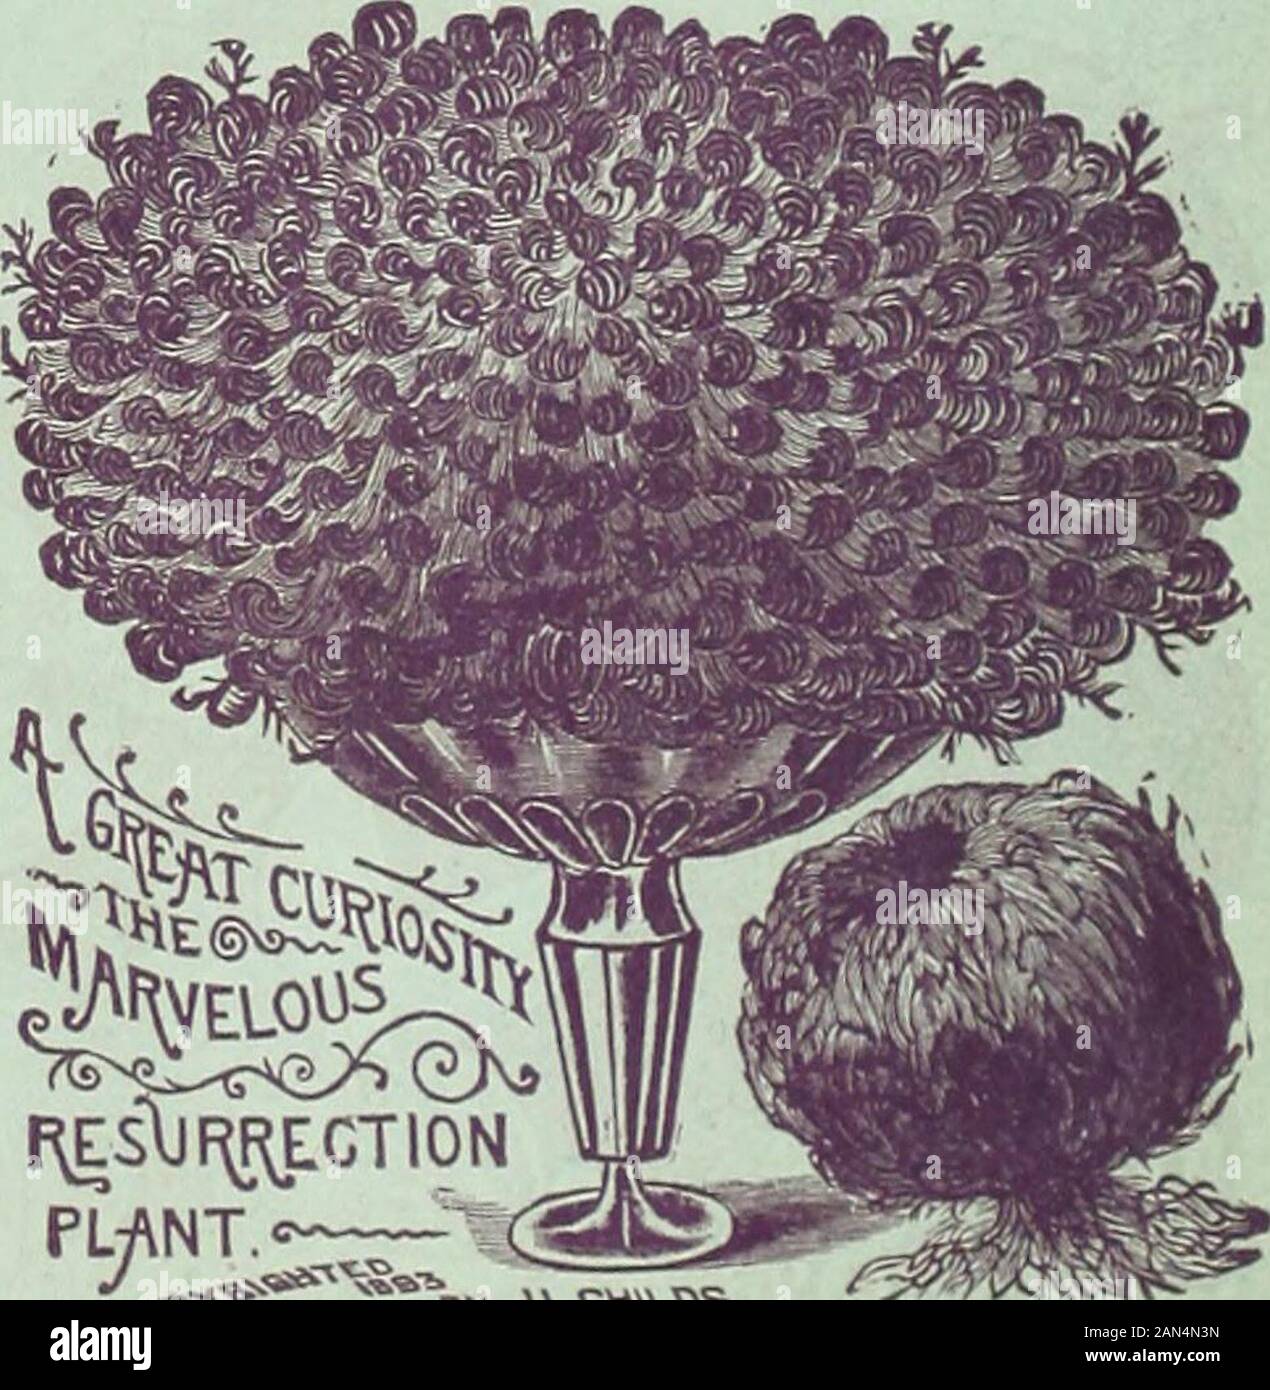 Childs' rare flowers, vegetables & fruits for 1895 . ngle or Transplanting Trotoel. This new Tool is the finest thing for garden work webAve ever seen. For transplanting, lifting or setting plantsor bulbs, it has no equal. Postpaid, 25 cents each. J^asscllia Jtiqcca. This plant has long, wiry, leafless stems which grow Ingraceful, drooping masses, flowing like hair. On these barestems are borne quantities of lone, tubular flowers of themost vivid .scarlet color, something like a Manettia bloom,but more numerous. It is a novel and beautiful plant, suita-ble either for beds in summer or lor pot Stock Photo